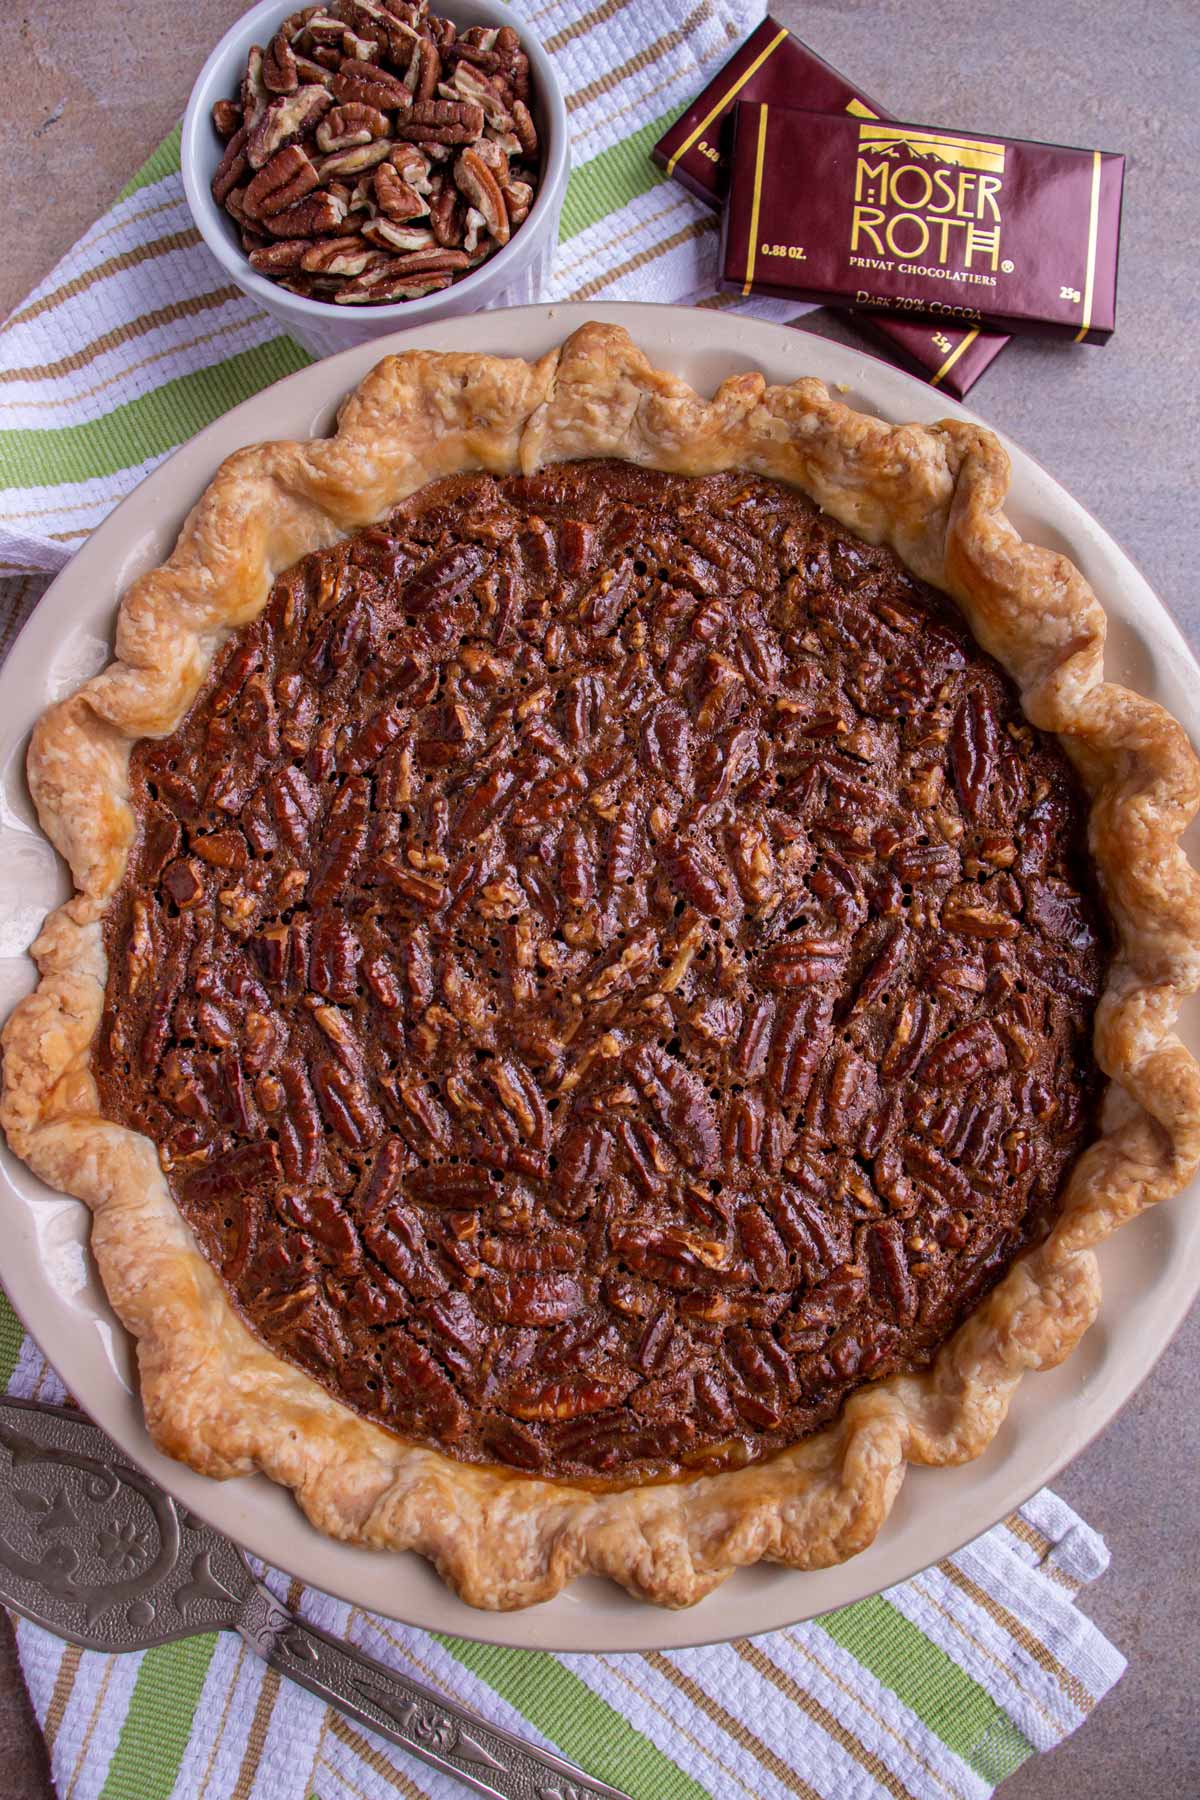 A chocolate pecan pie on a striped towel with pecans and chocolate bars next to it.